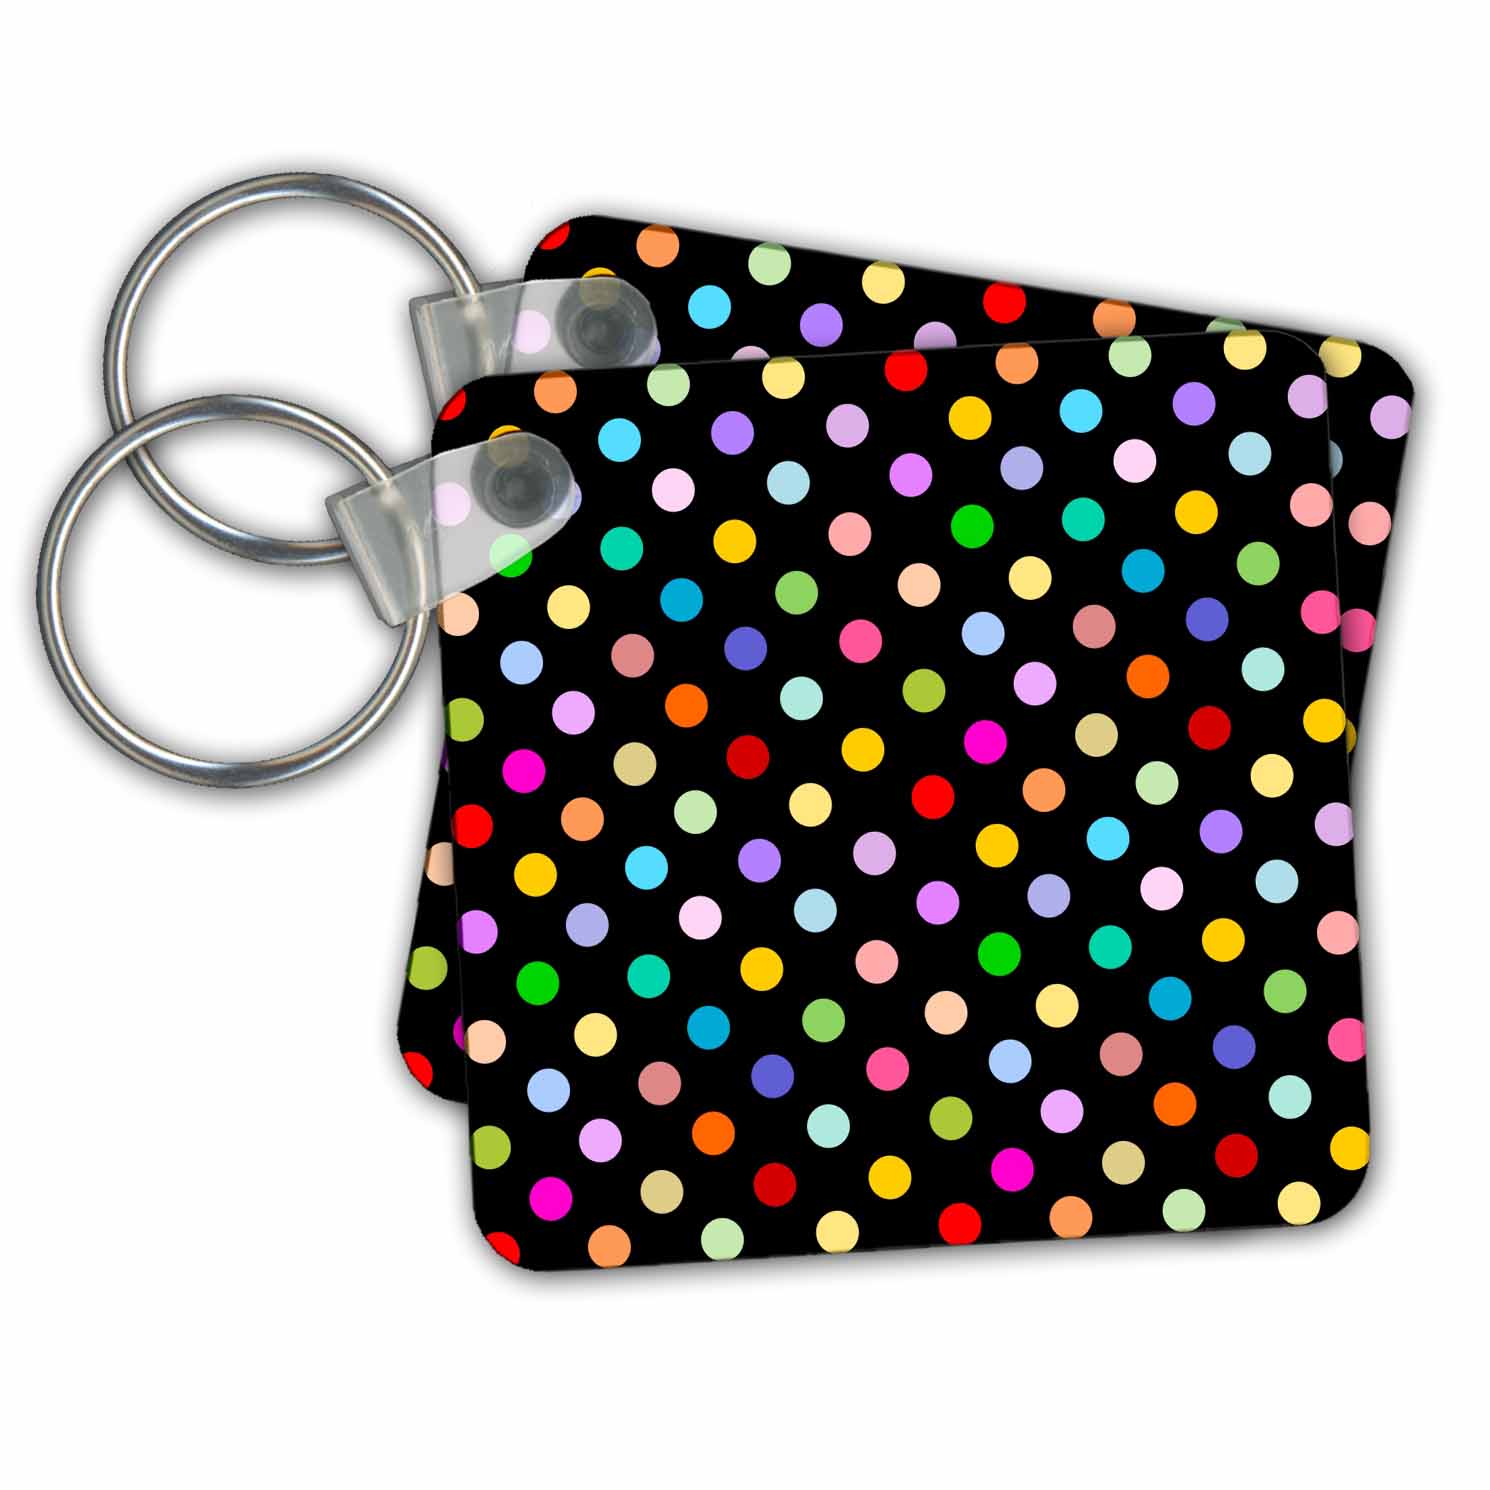 3dRose Colorful Polka dot pattern on black - Rainbow Multicolor Cute Dots and Spots Patterns - Key Chains, 2.25 by 2.25-inch, set of 2 - image 1 of 1